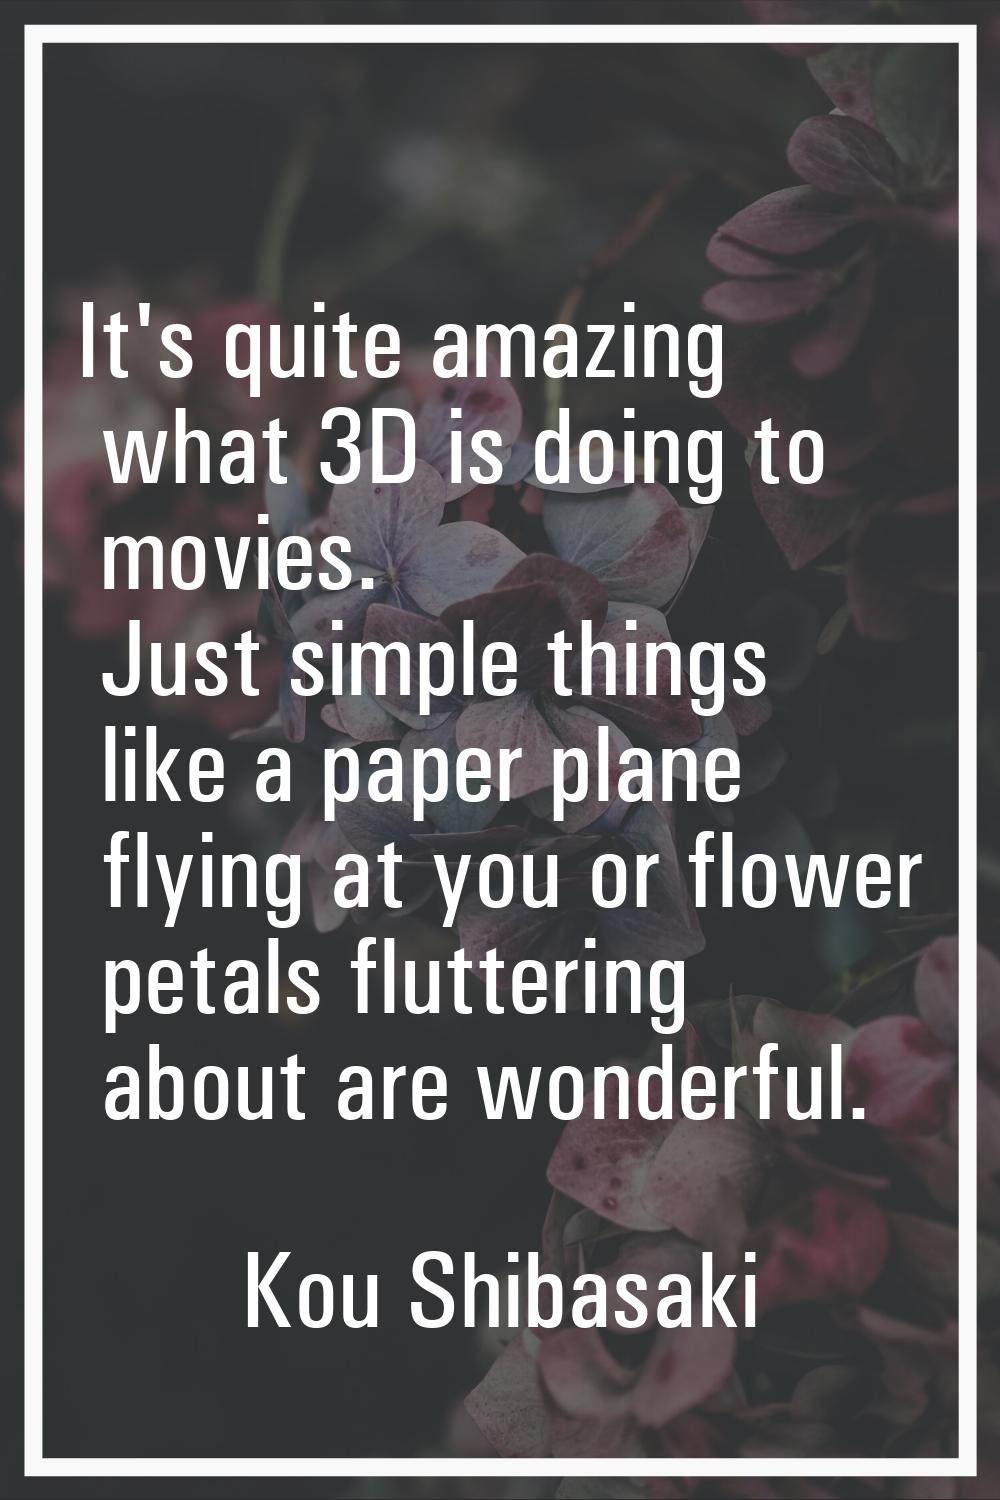 It's quite amazing what 3D is doing to movies. Just simple things like a paper plane flying at you 